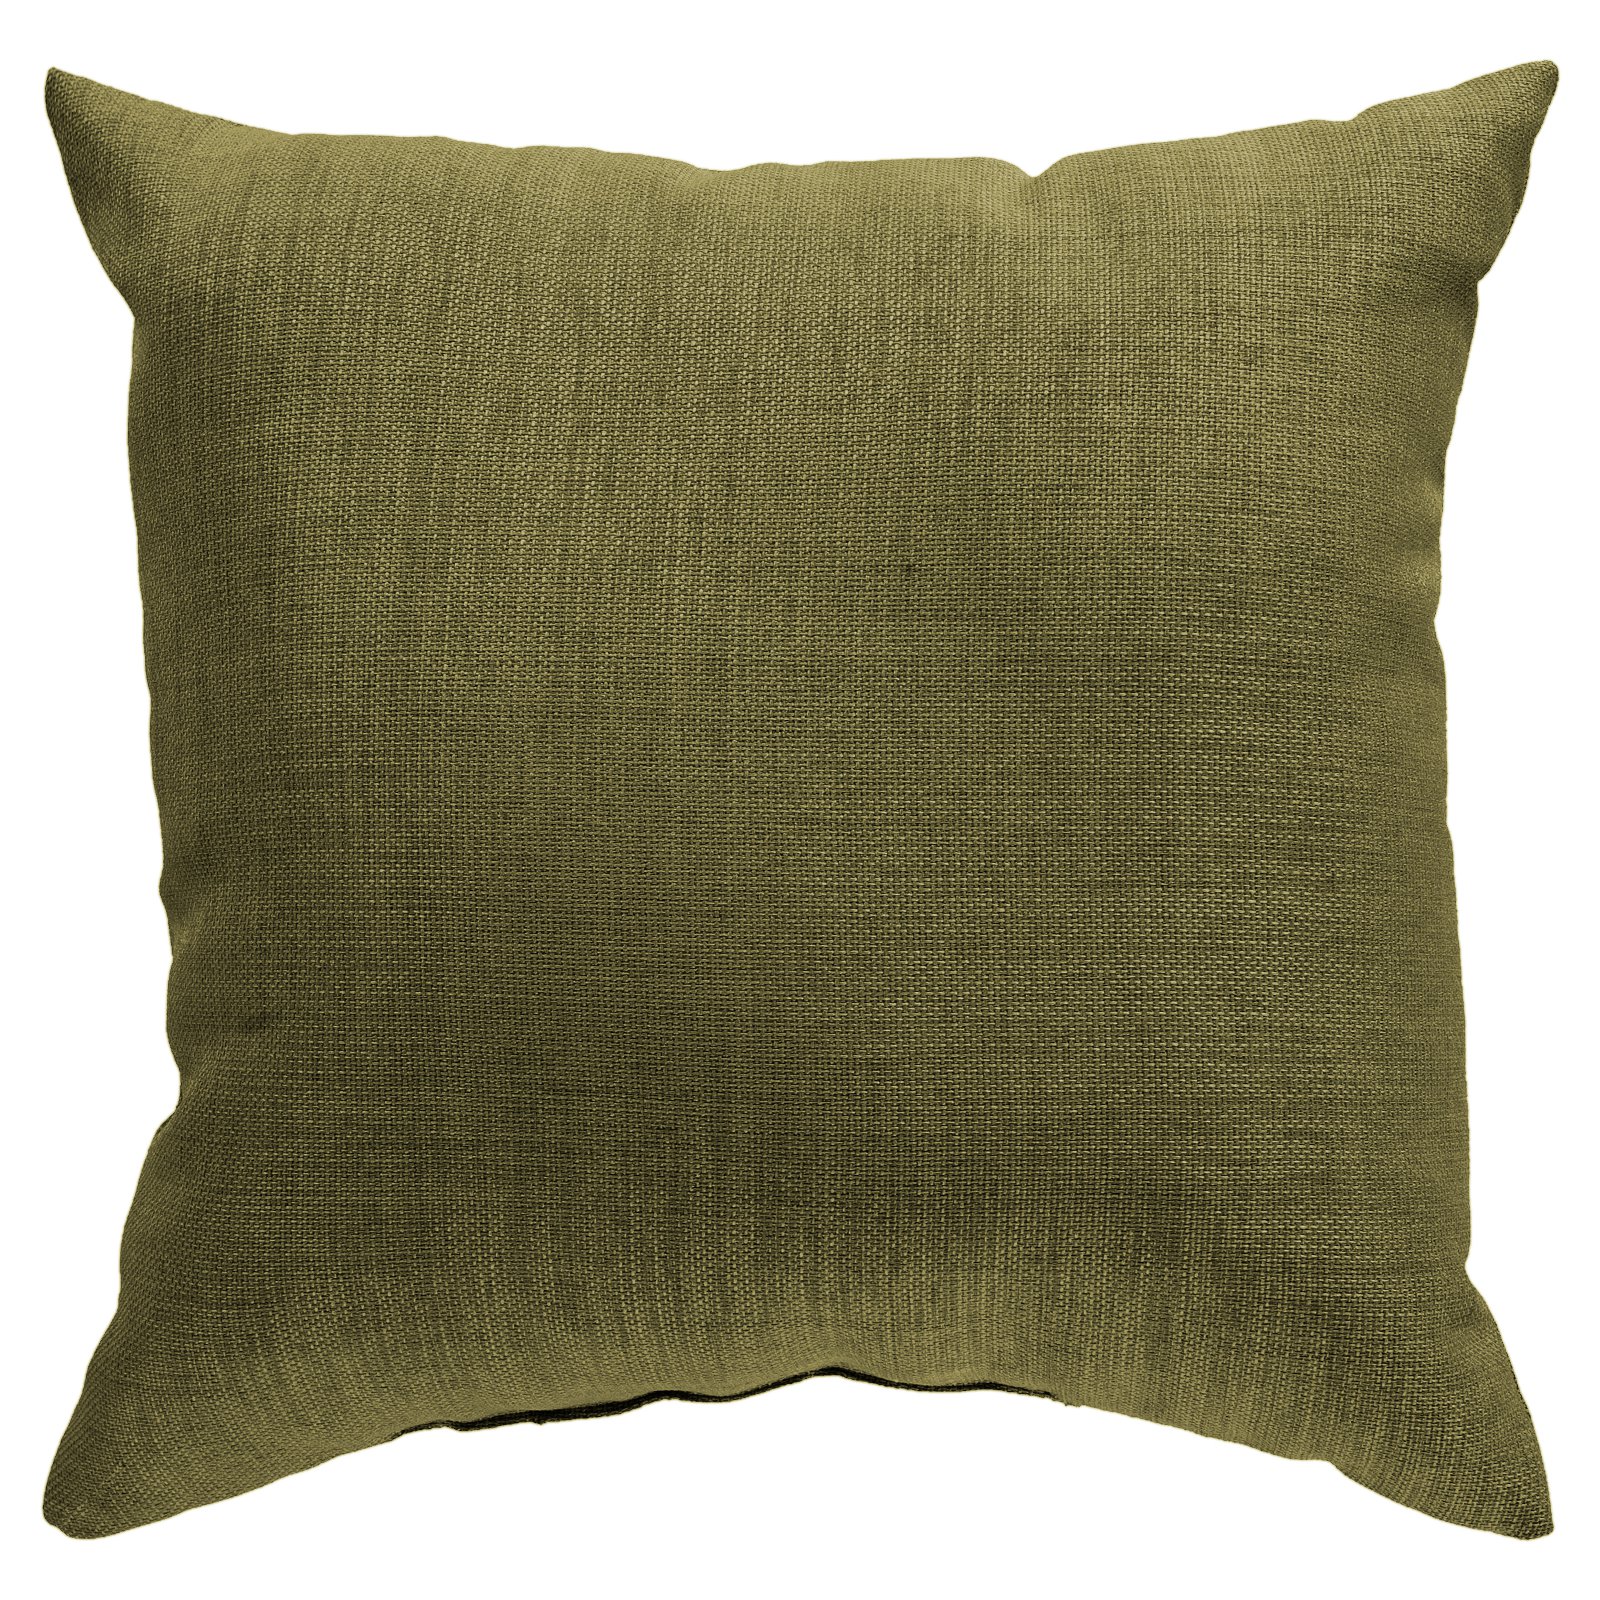 Surya 18 x 18 in. Polyester Decorative Pillow - image 1 of 2